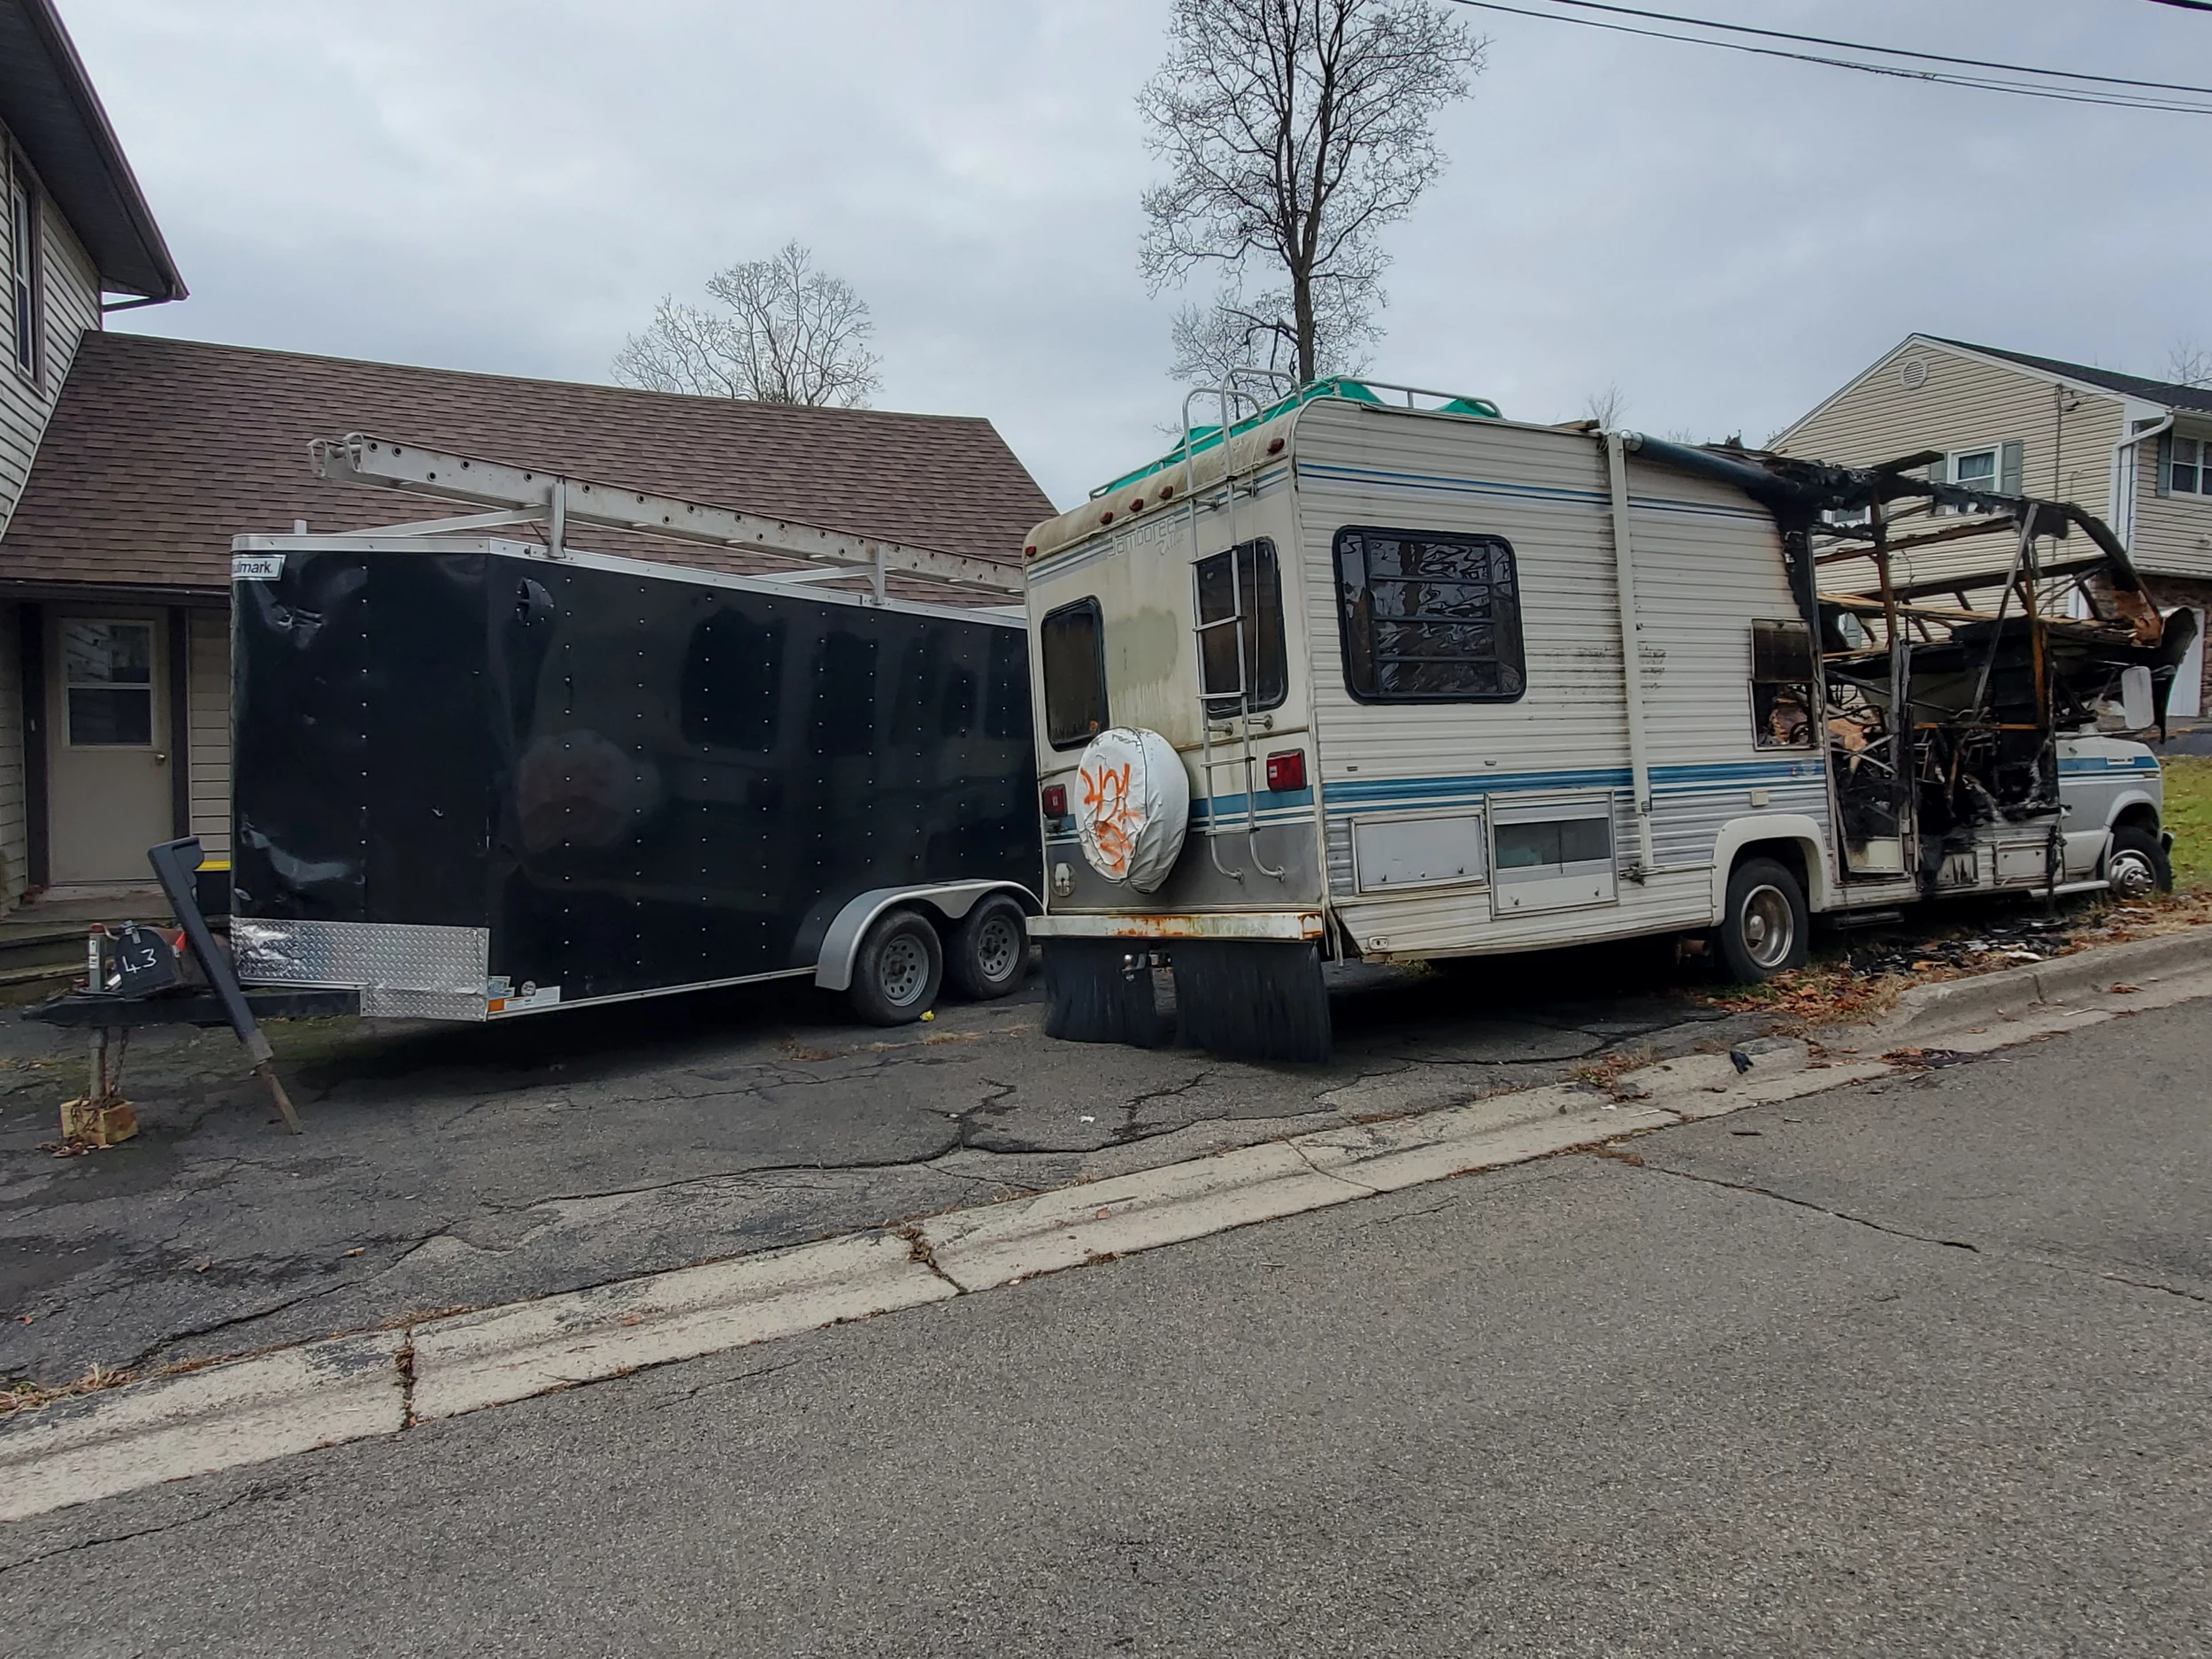 Residents Near Ross Park Want Burnt-Out RV Eyesore Hauled Away picture image